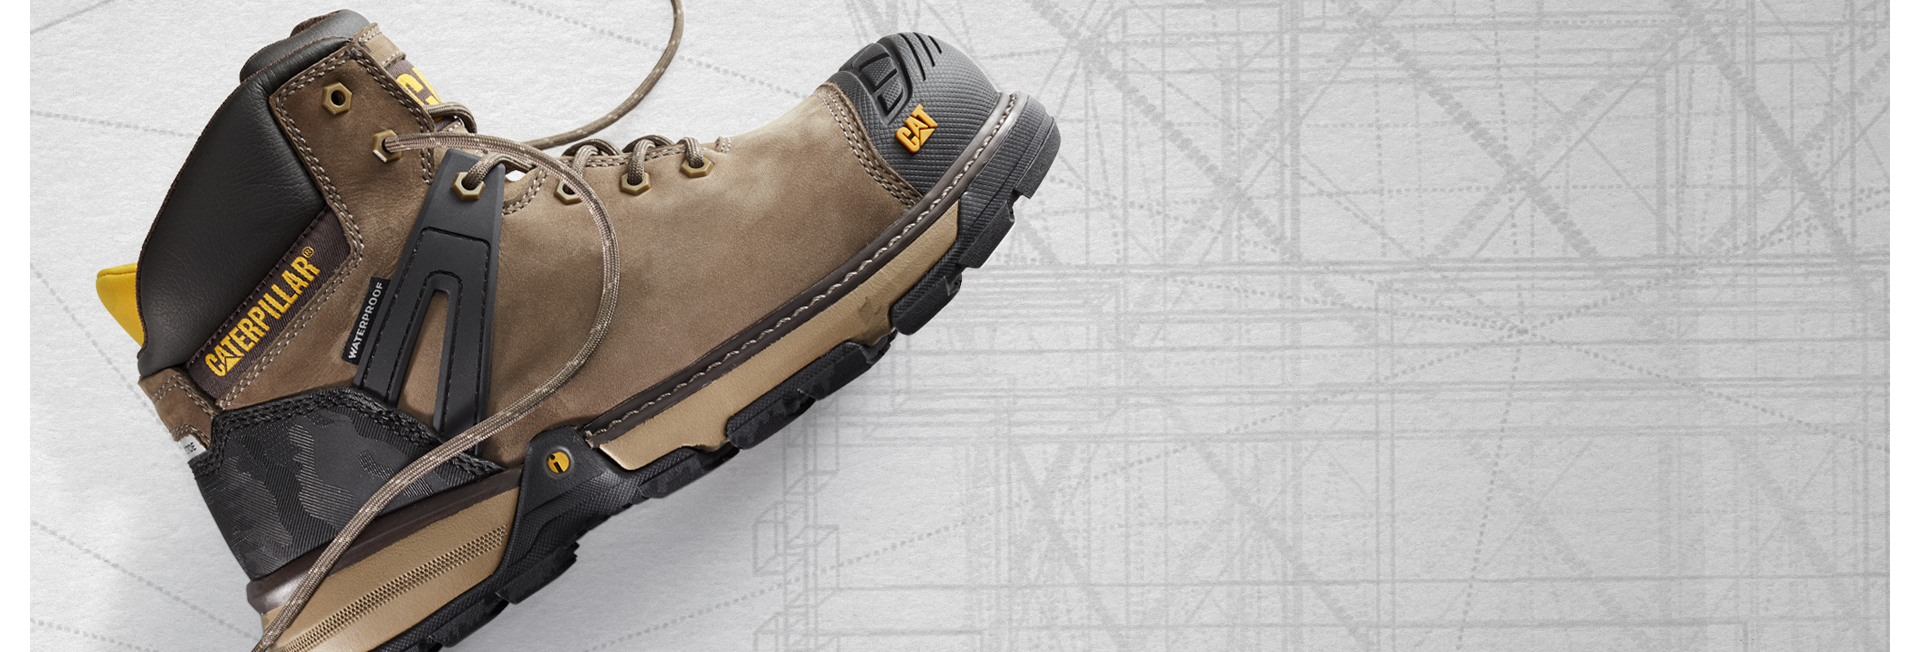 caterpillar shoes safety boots